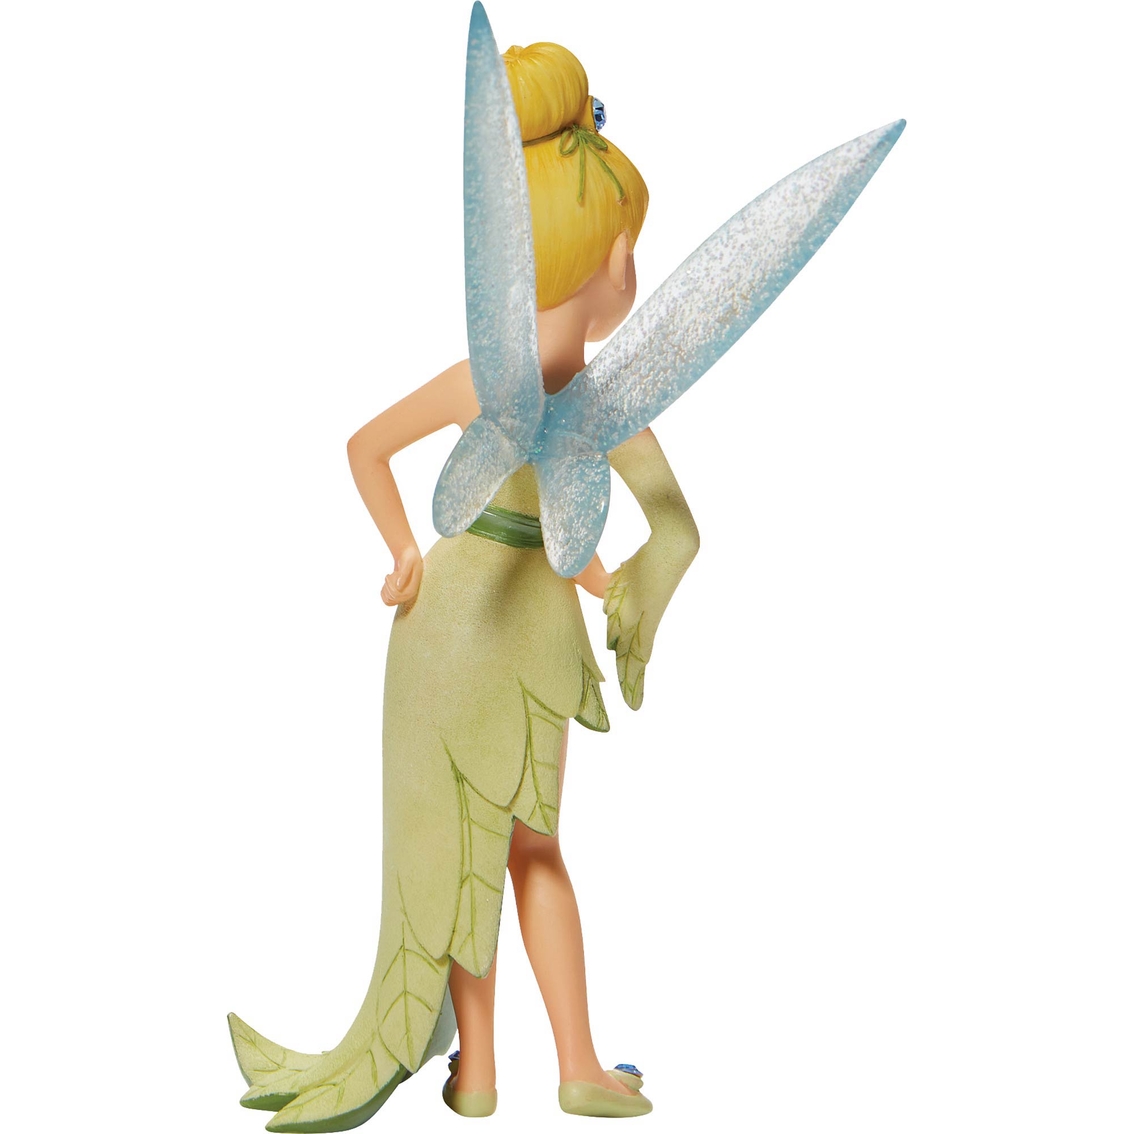 Disney Showcase Couture de Force Tinker Bell Figurine - Image 4 of 4